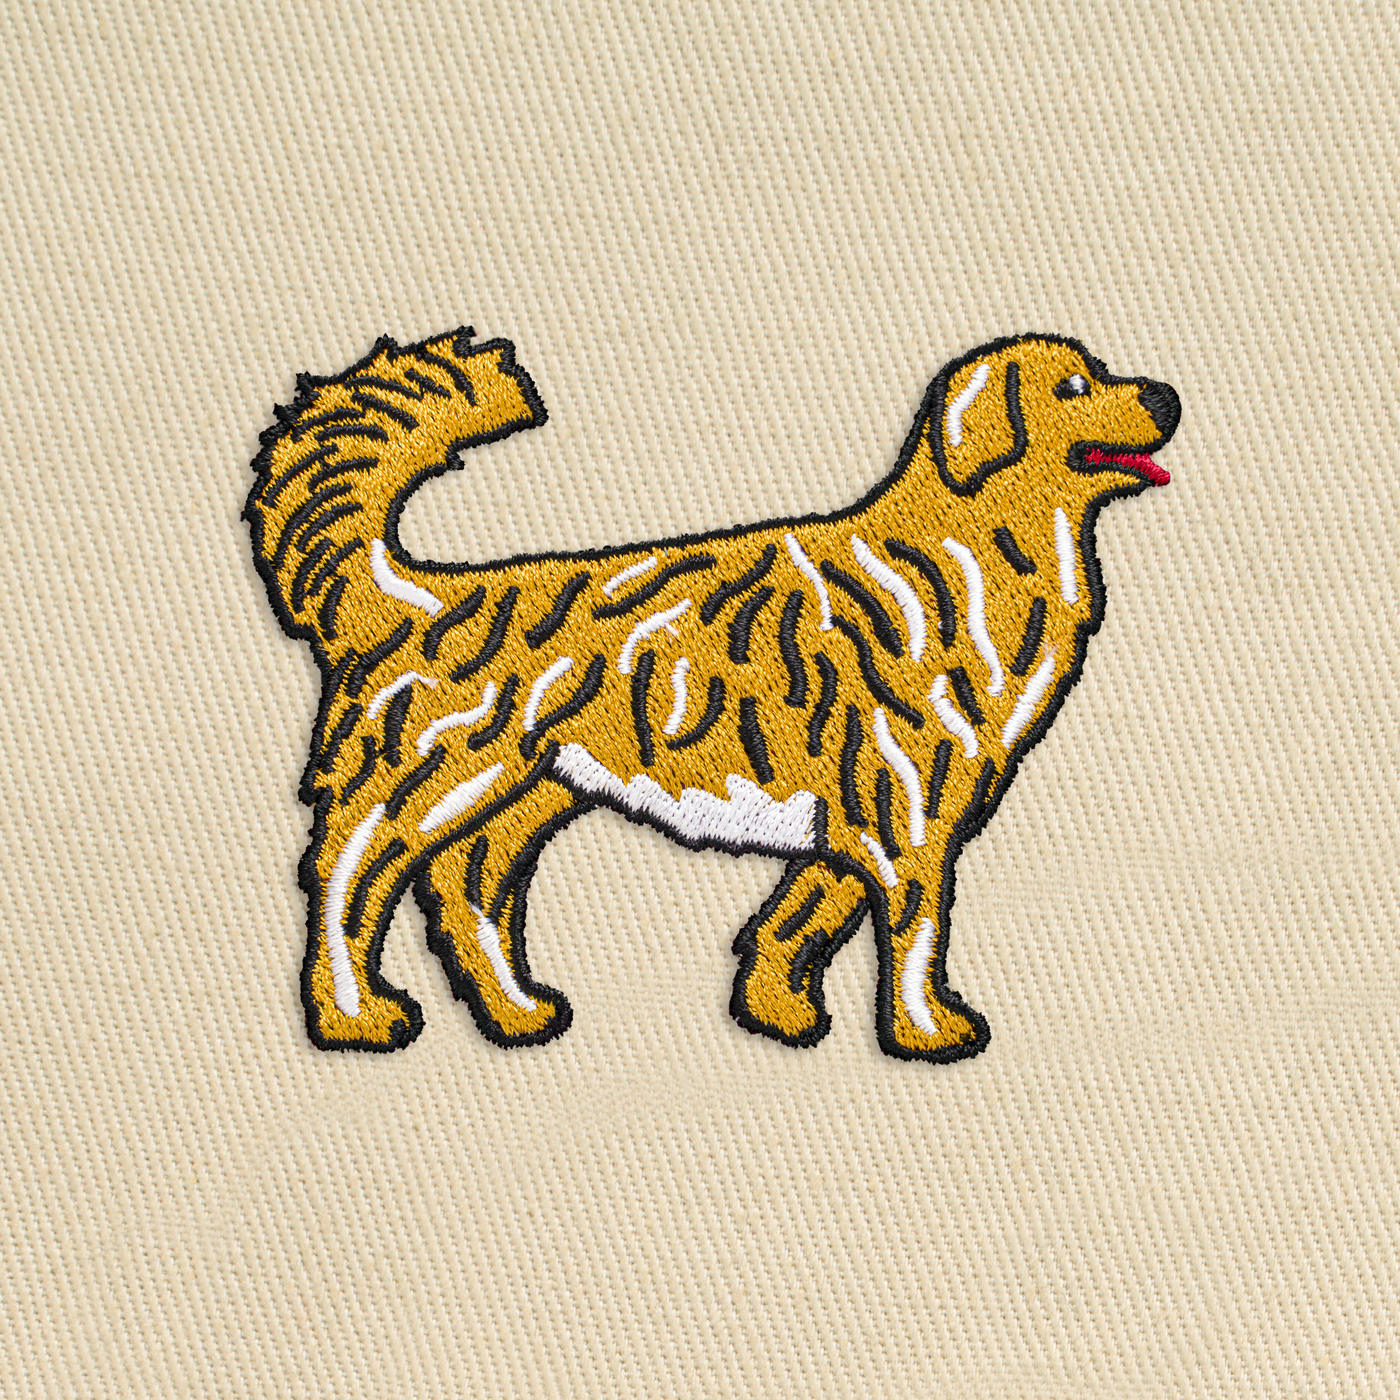 Bobby's Planet Embroidered Golden Retriever Tote Bag from Paws Dog Cat Animals Collection in Oyster Color#color_oyster